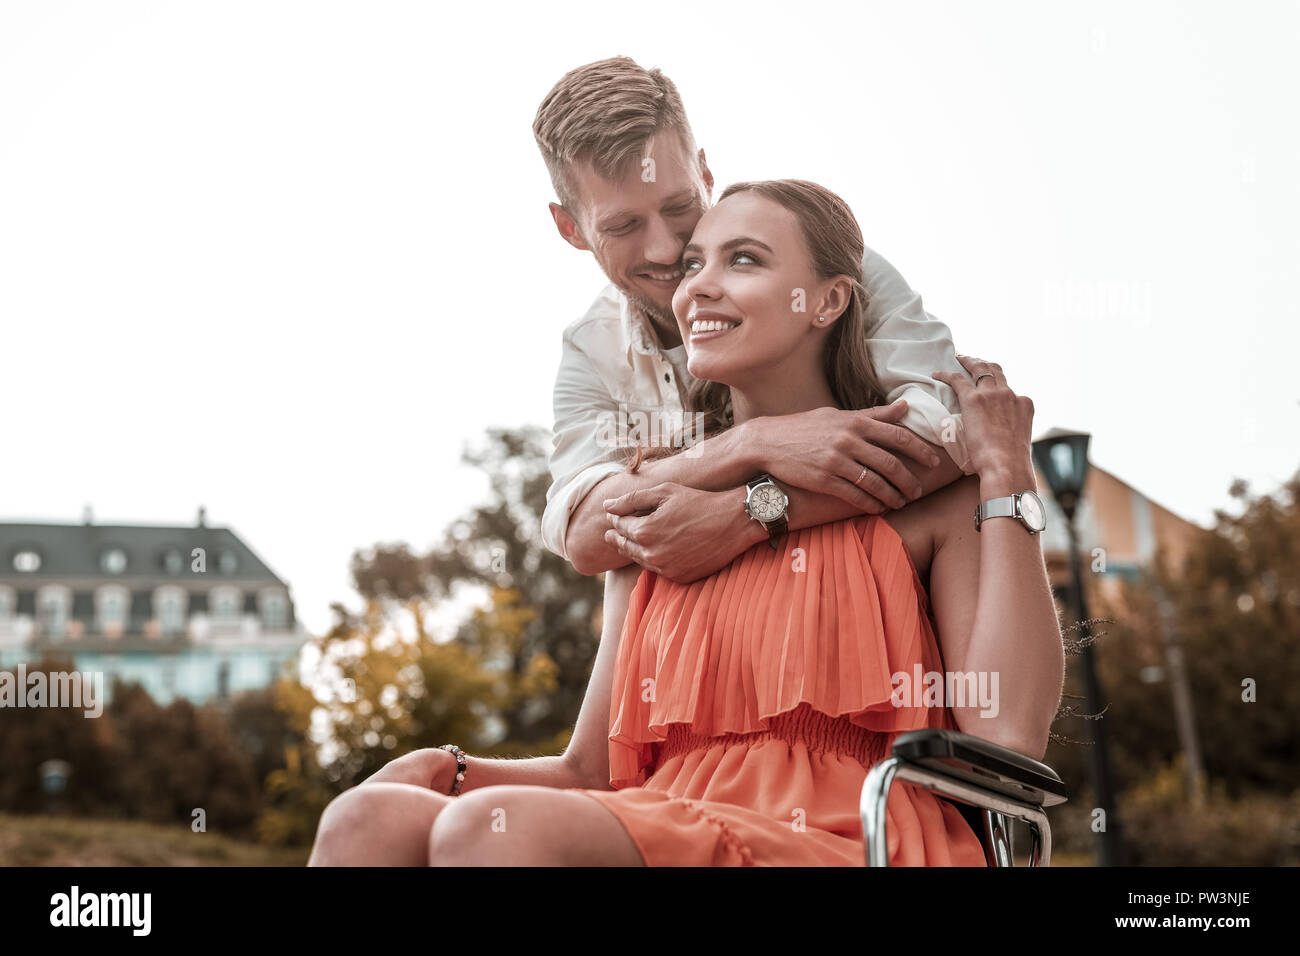 Disabled girl feeling happy while handsome man hugging her Stock Photo